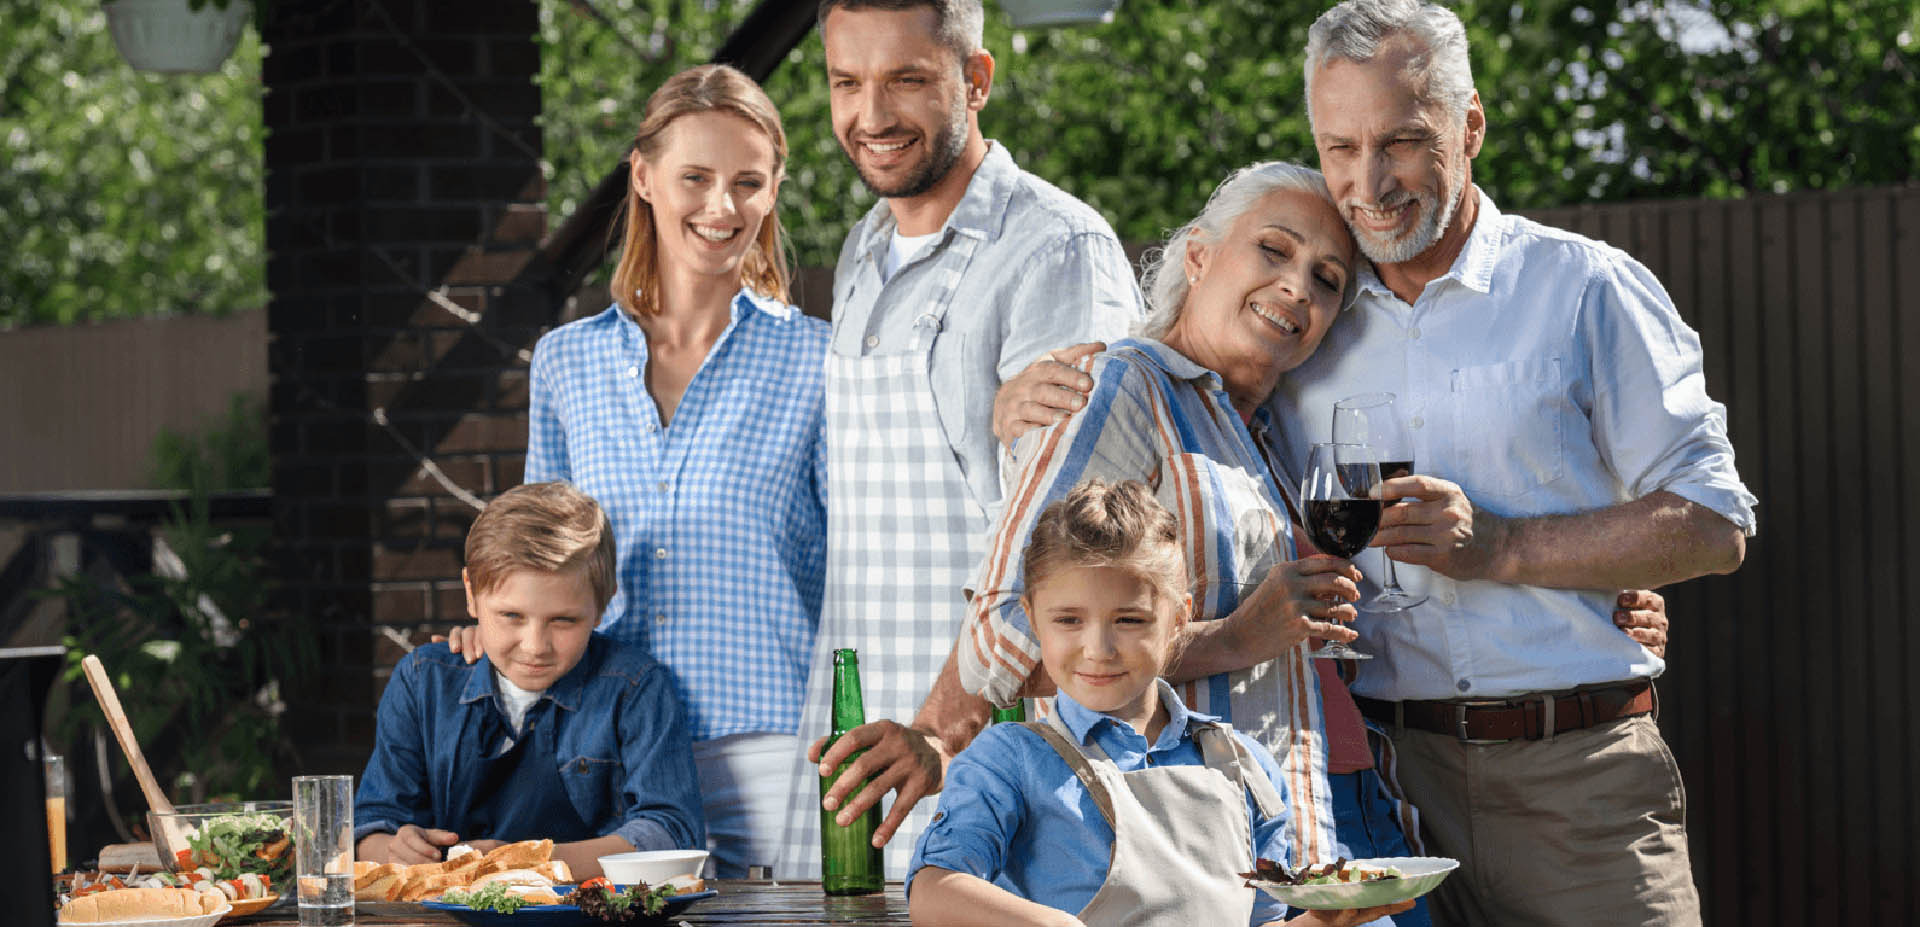 Home Model Options for Multigenerational Families Featured Image